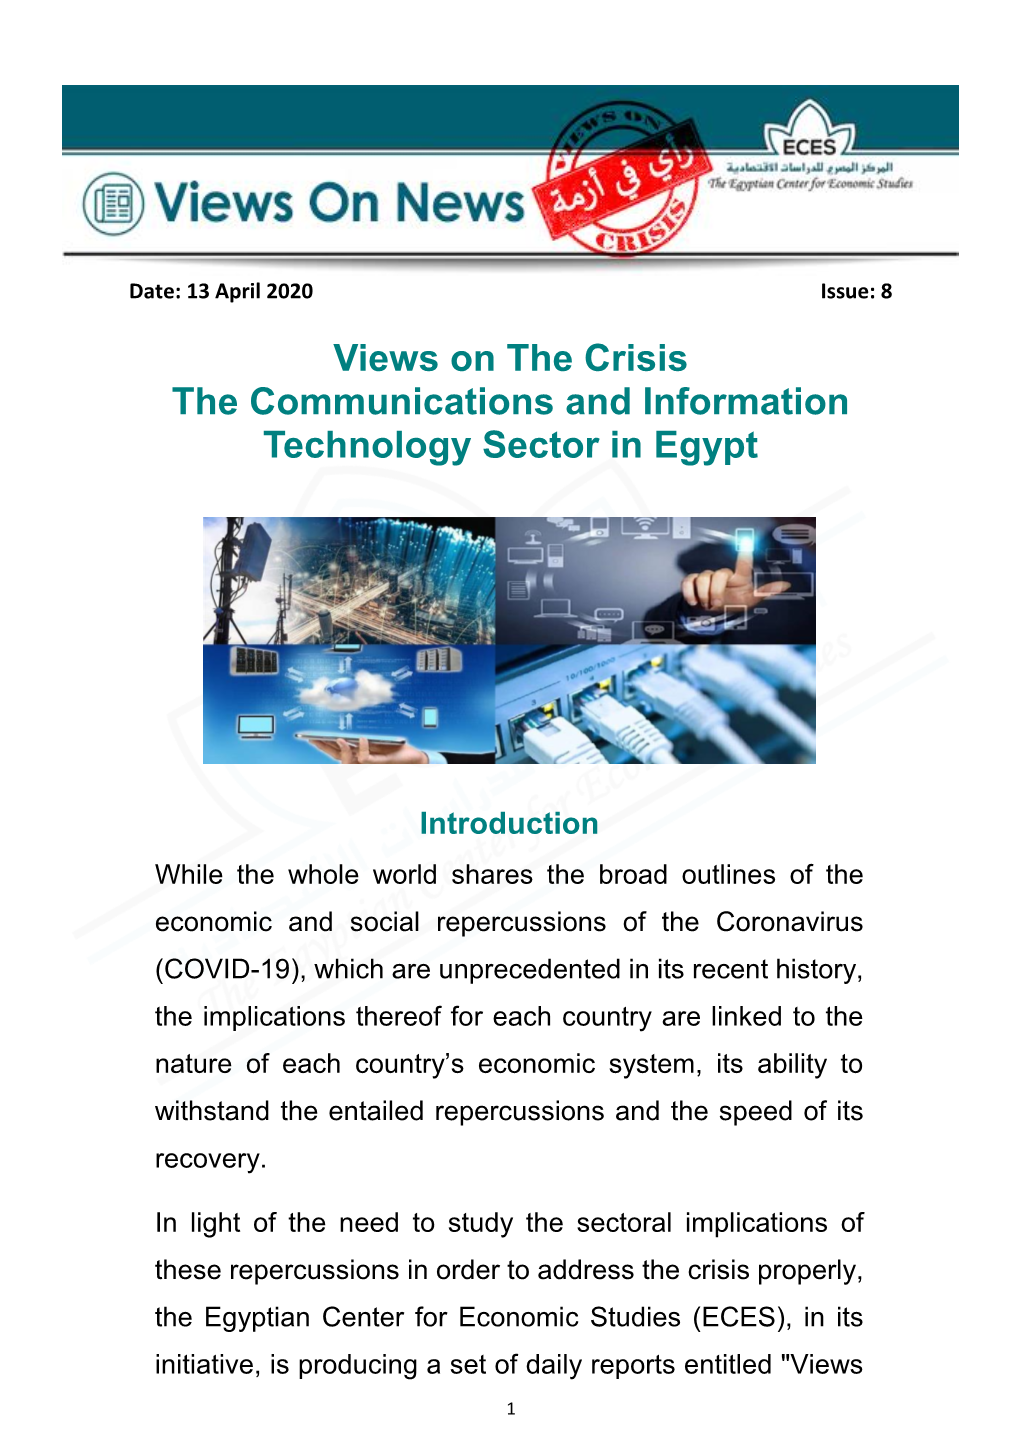 Communications and Information Technology Sector in Egypt